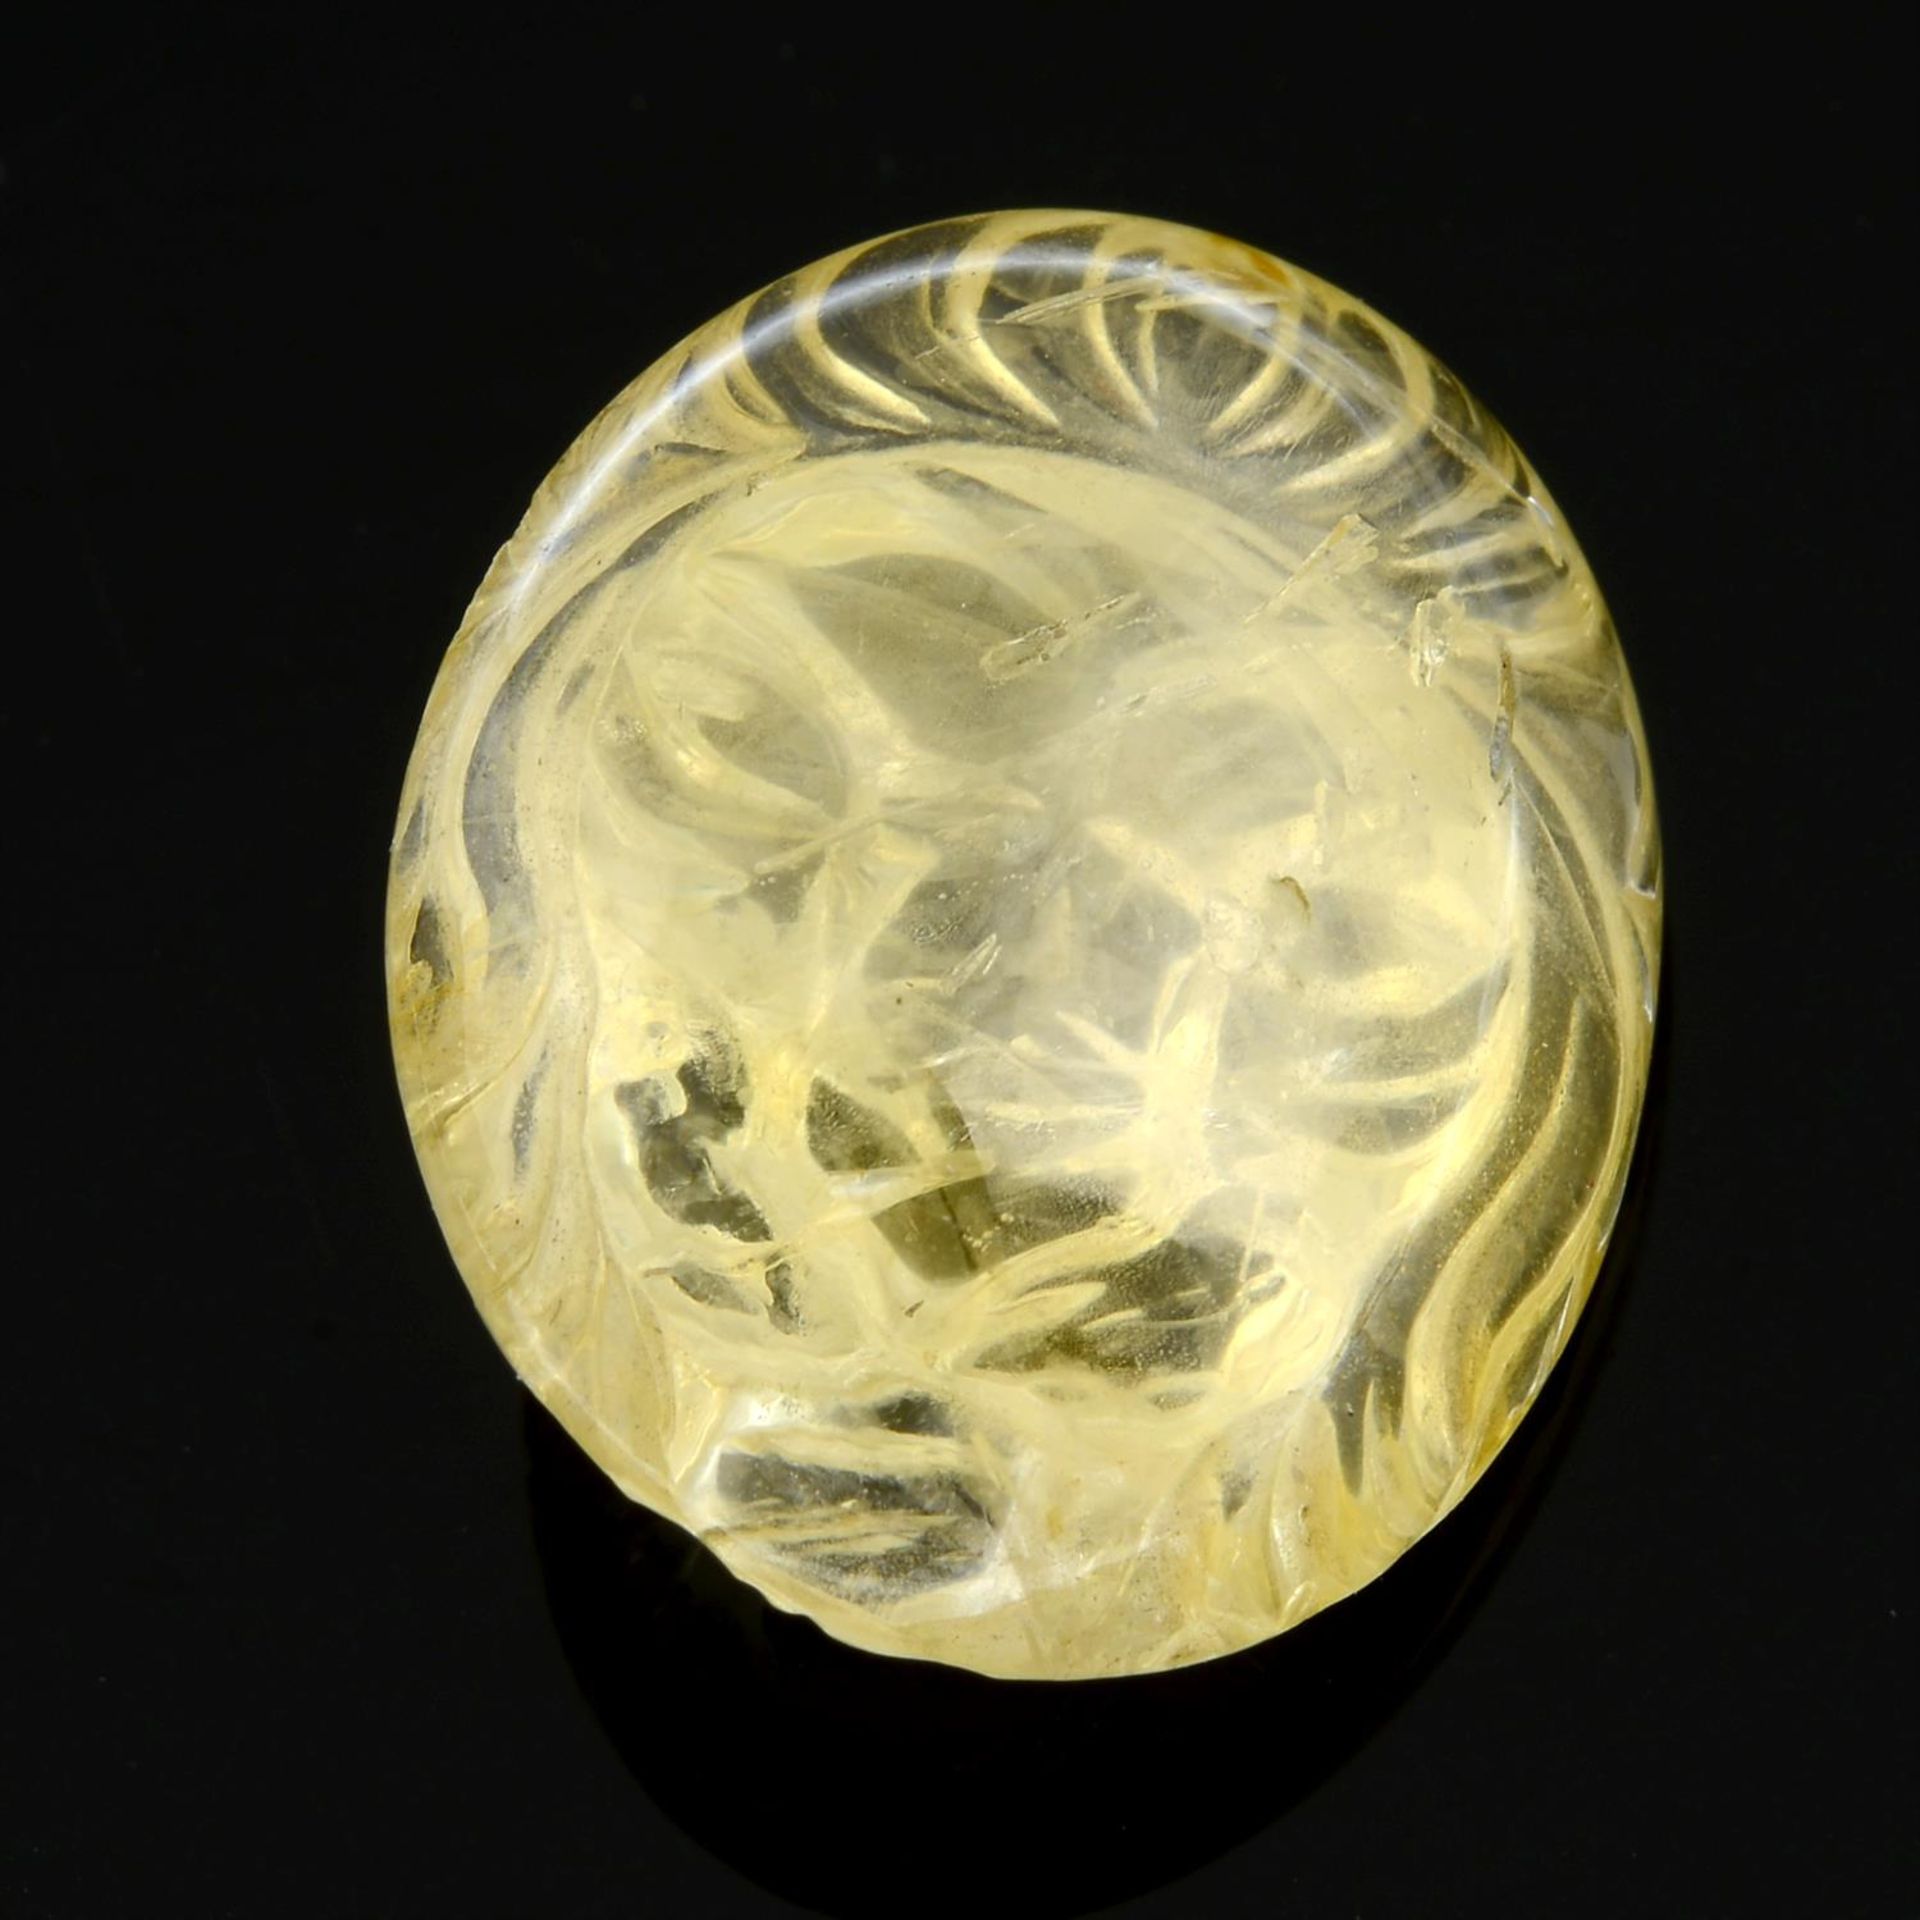 A carved Sri Lankan yellow sapphire, depicting a lion's head. - Image 3 of 3